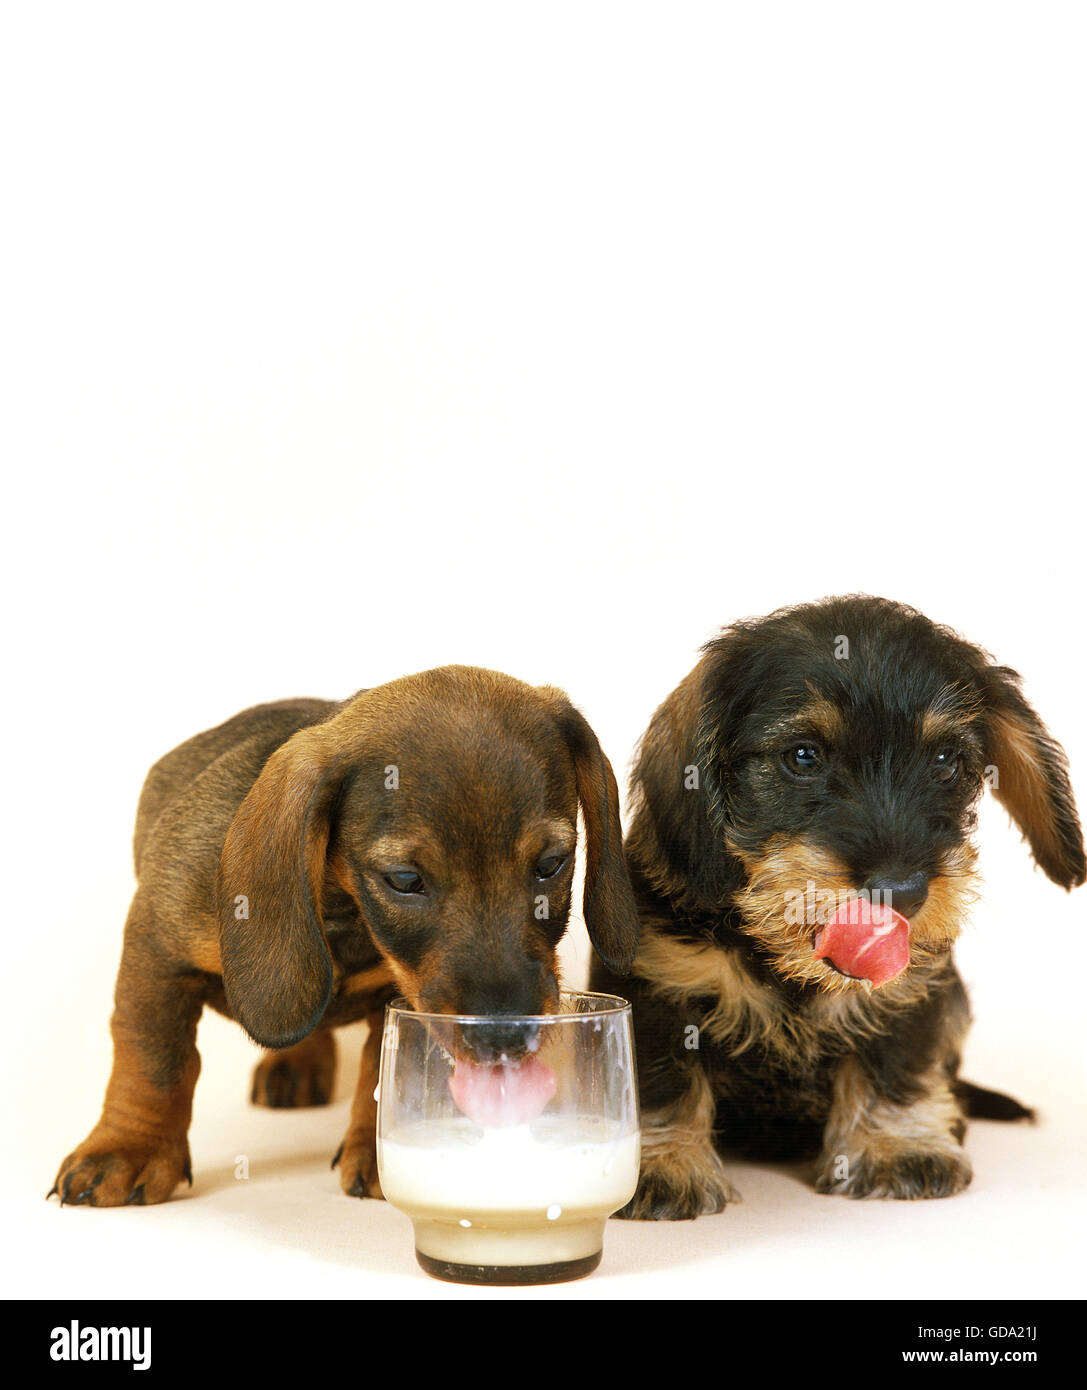 WIRE-HAIRED DACHSHUND AND SMOOTH-HAIRED DACHSHUND, PUPPIES DRINKING MILK Stock Photo